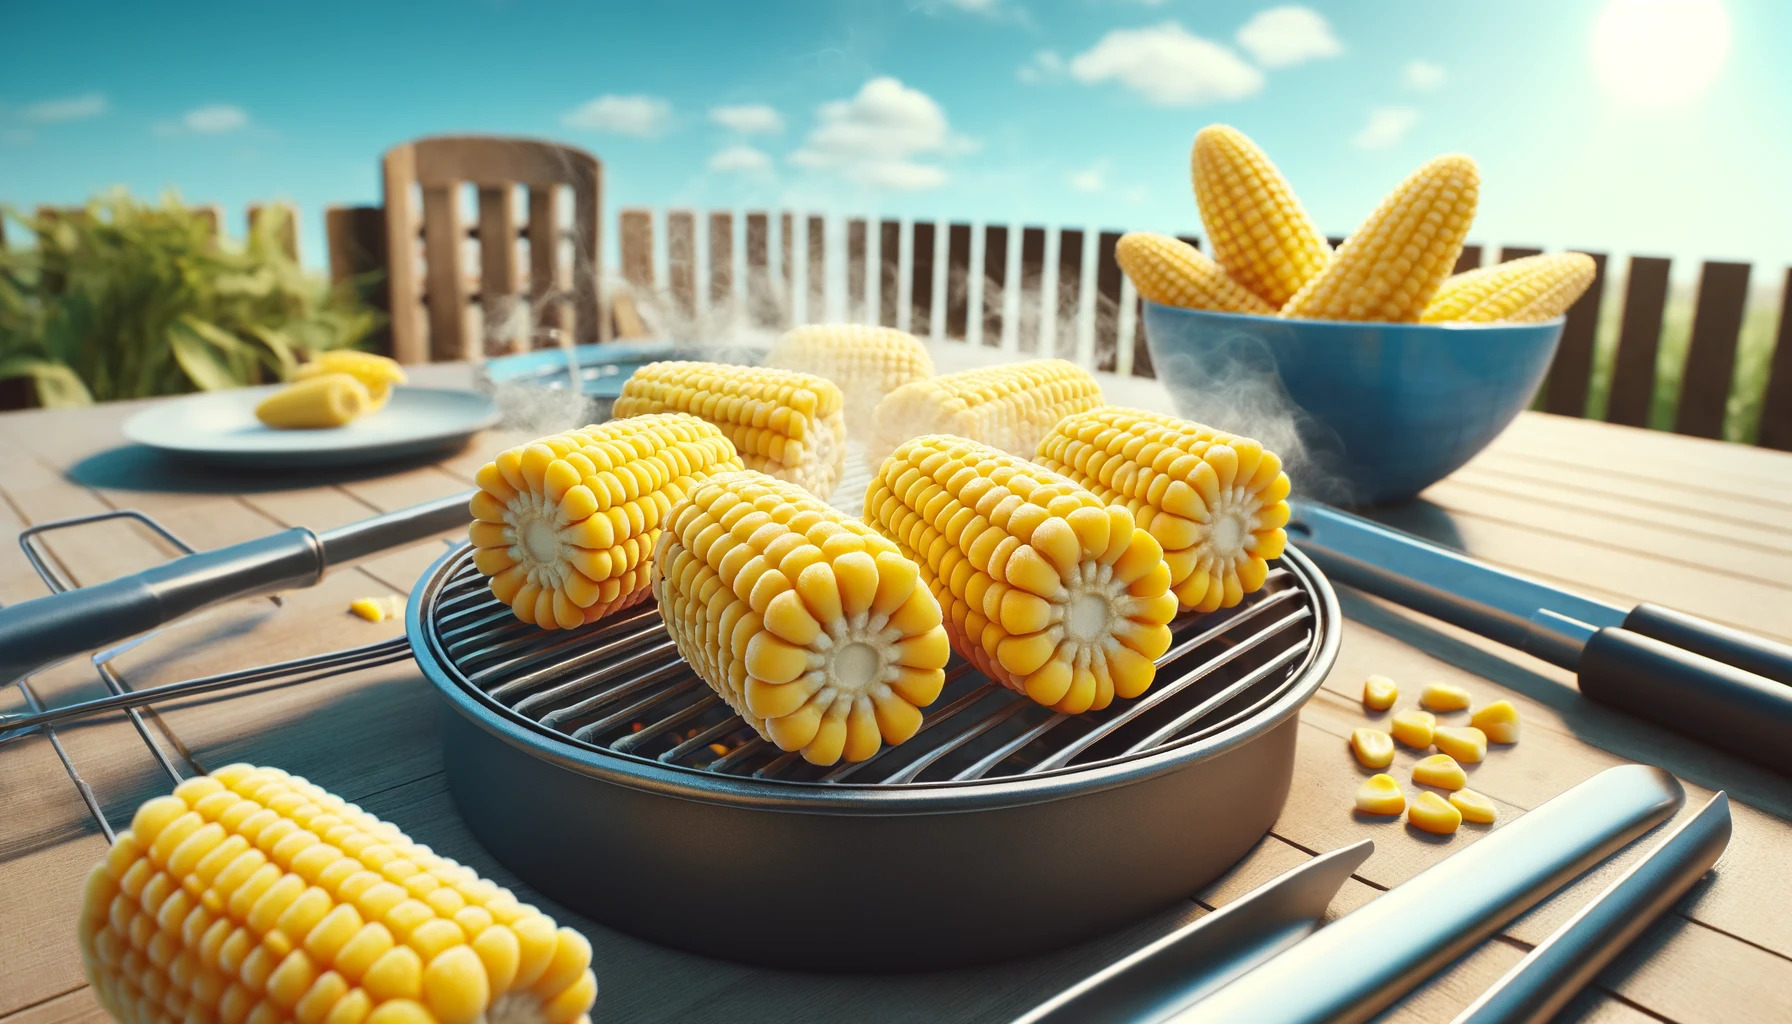 How To Grill Frozen Sweetcorn On The Grill - Recipes.net